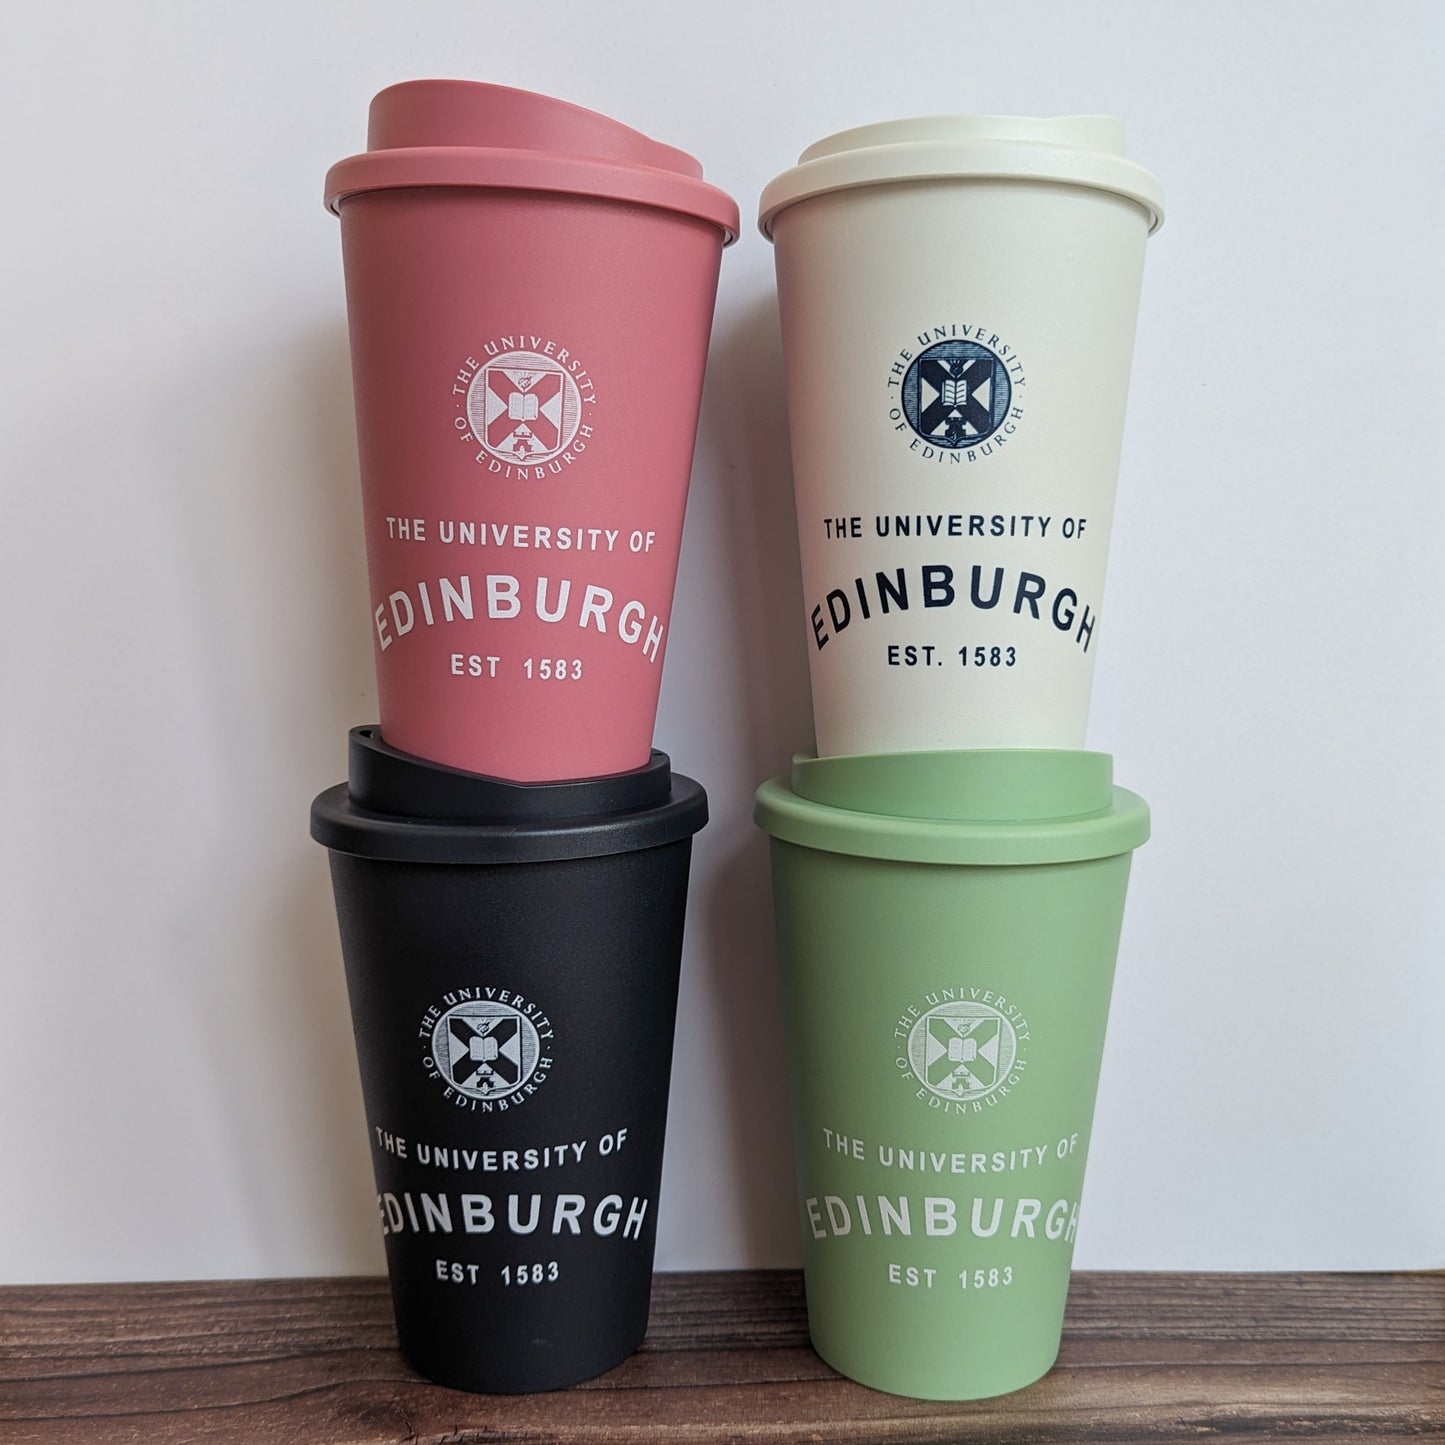 Eco Coffee Cup shown in all four colour options:  Raspberry (Blush Pink), White, Sage Green (Pastel) and Black. Each has the University Crest  and the text 'The University of Edinburgh EST 1583', the word 'Edinburgh' is curved.